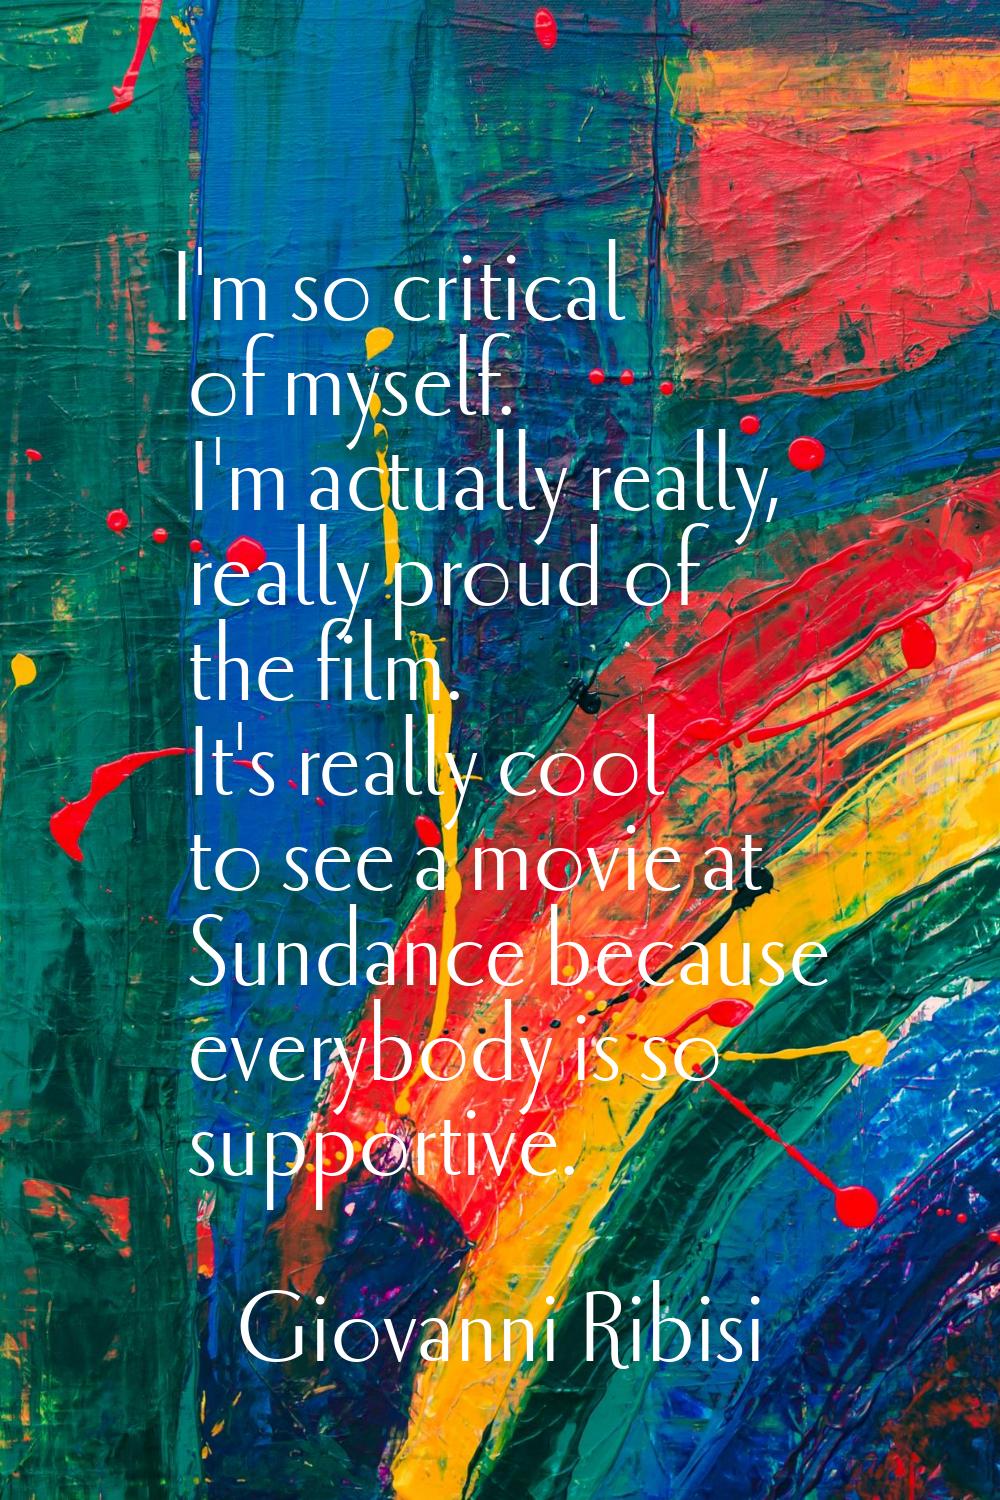 I'm so critical of myself. I'm actually really, really proud of the film. It's really cool to see a